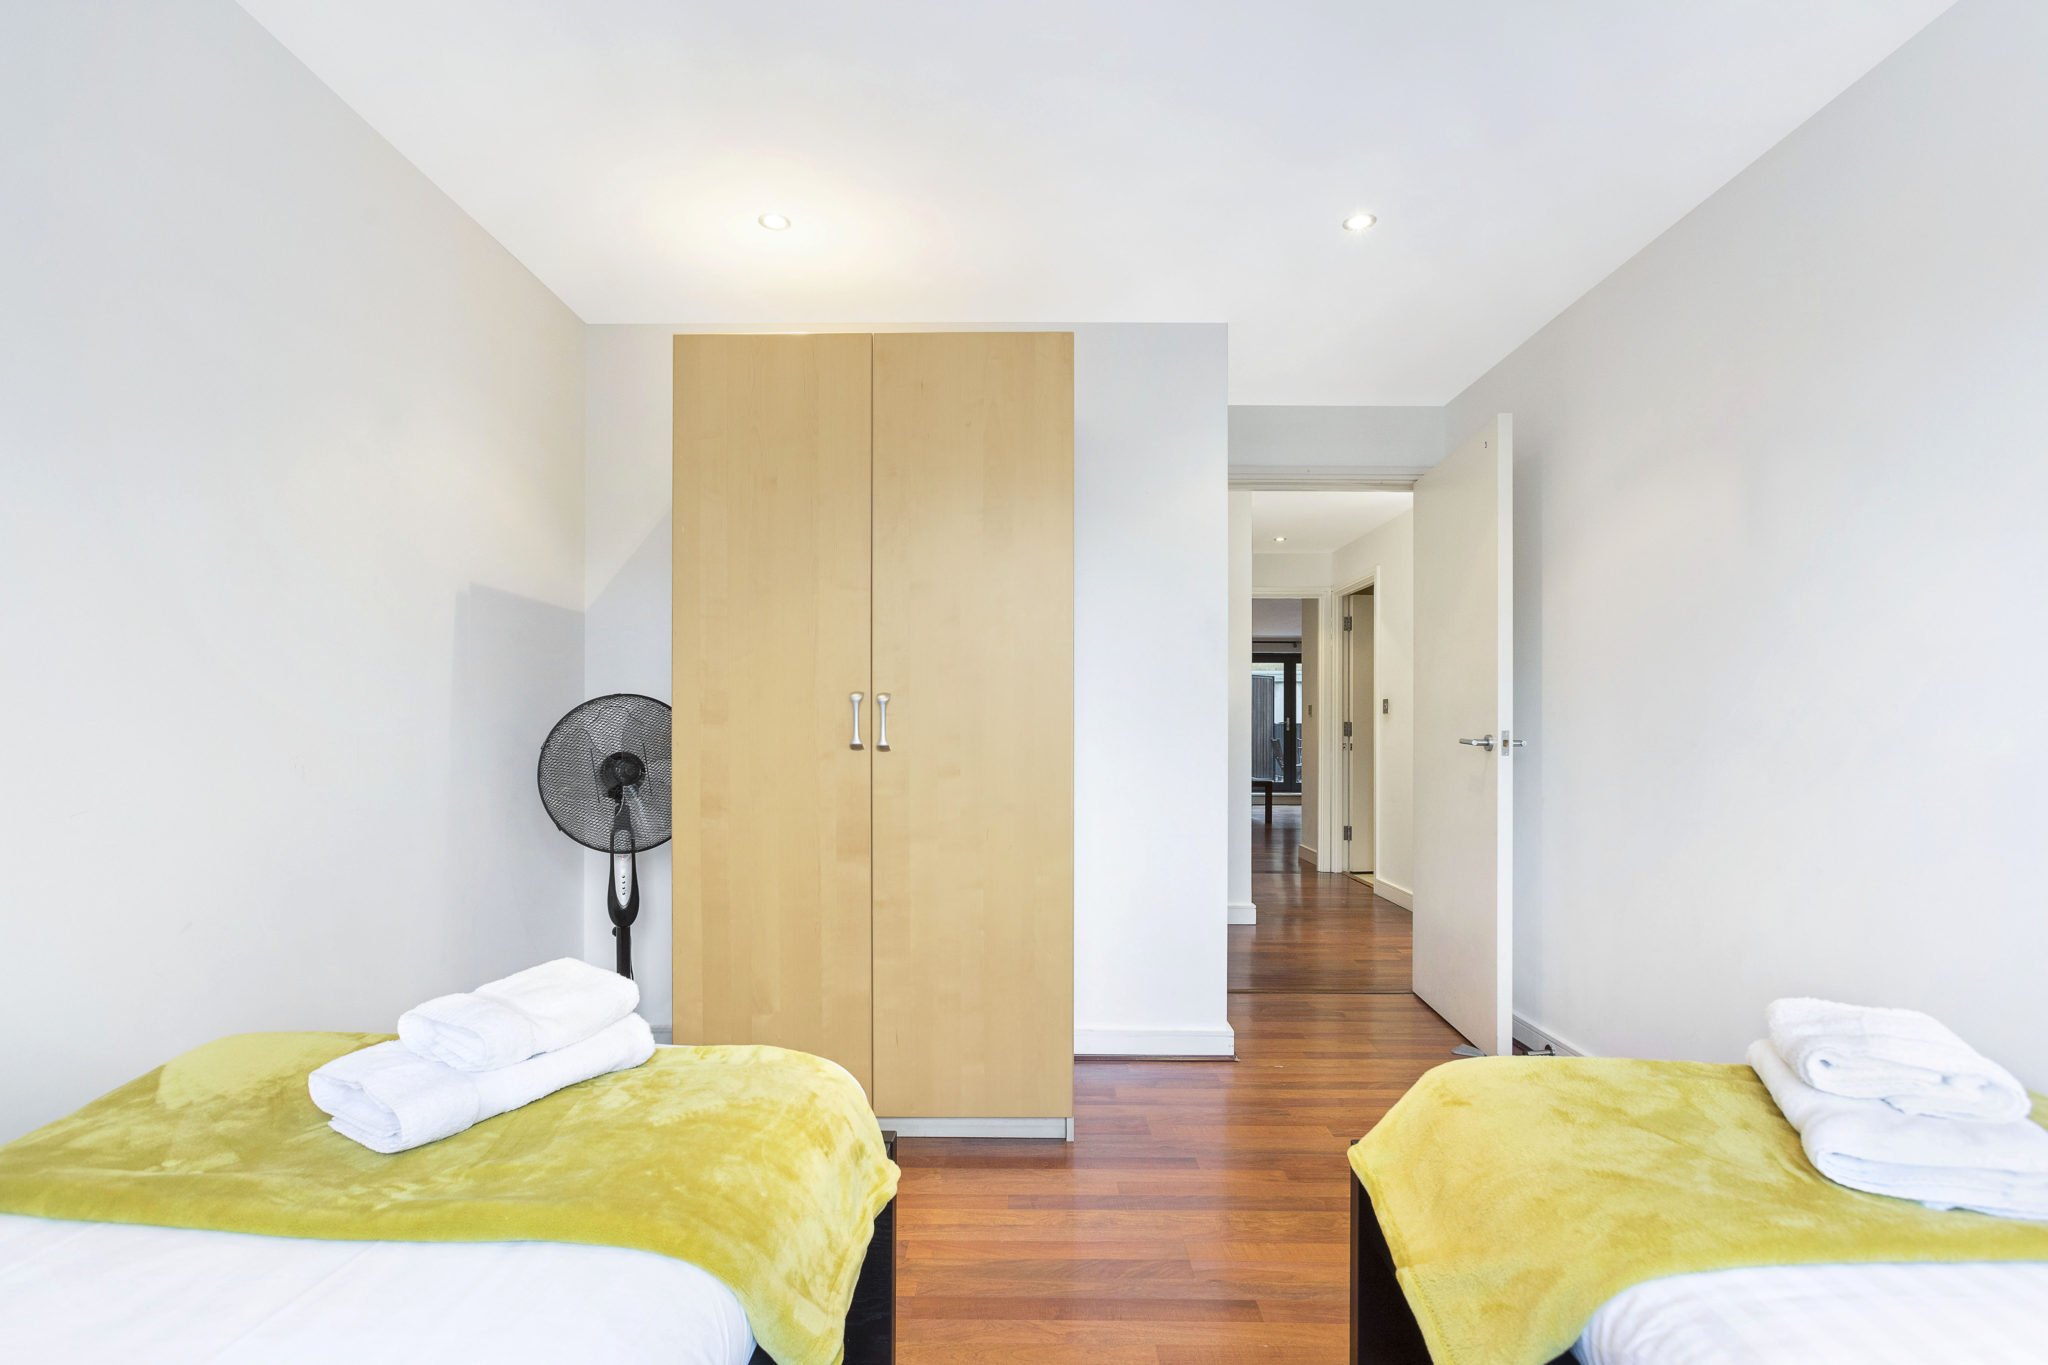 Looking-for-affordable-apartments-in-London-Euston?-why-not-book-our-lovely-Euston-Serviced-Apartment-at-William-Road.-Call-us-today-for-great-rates.